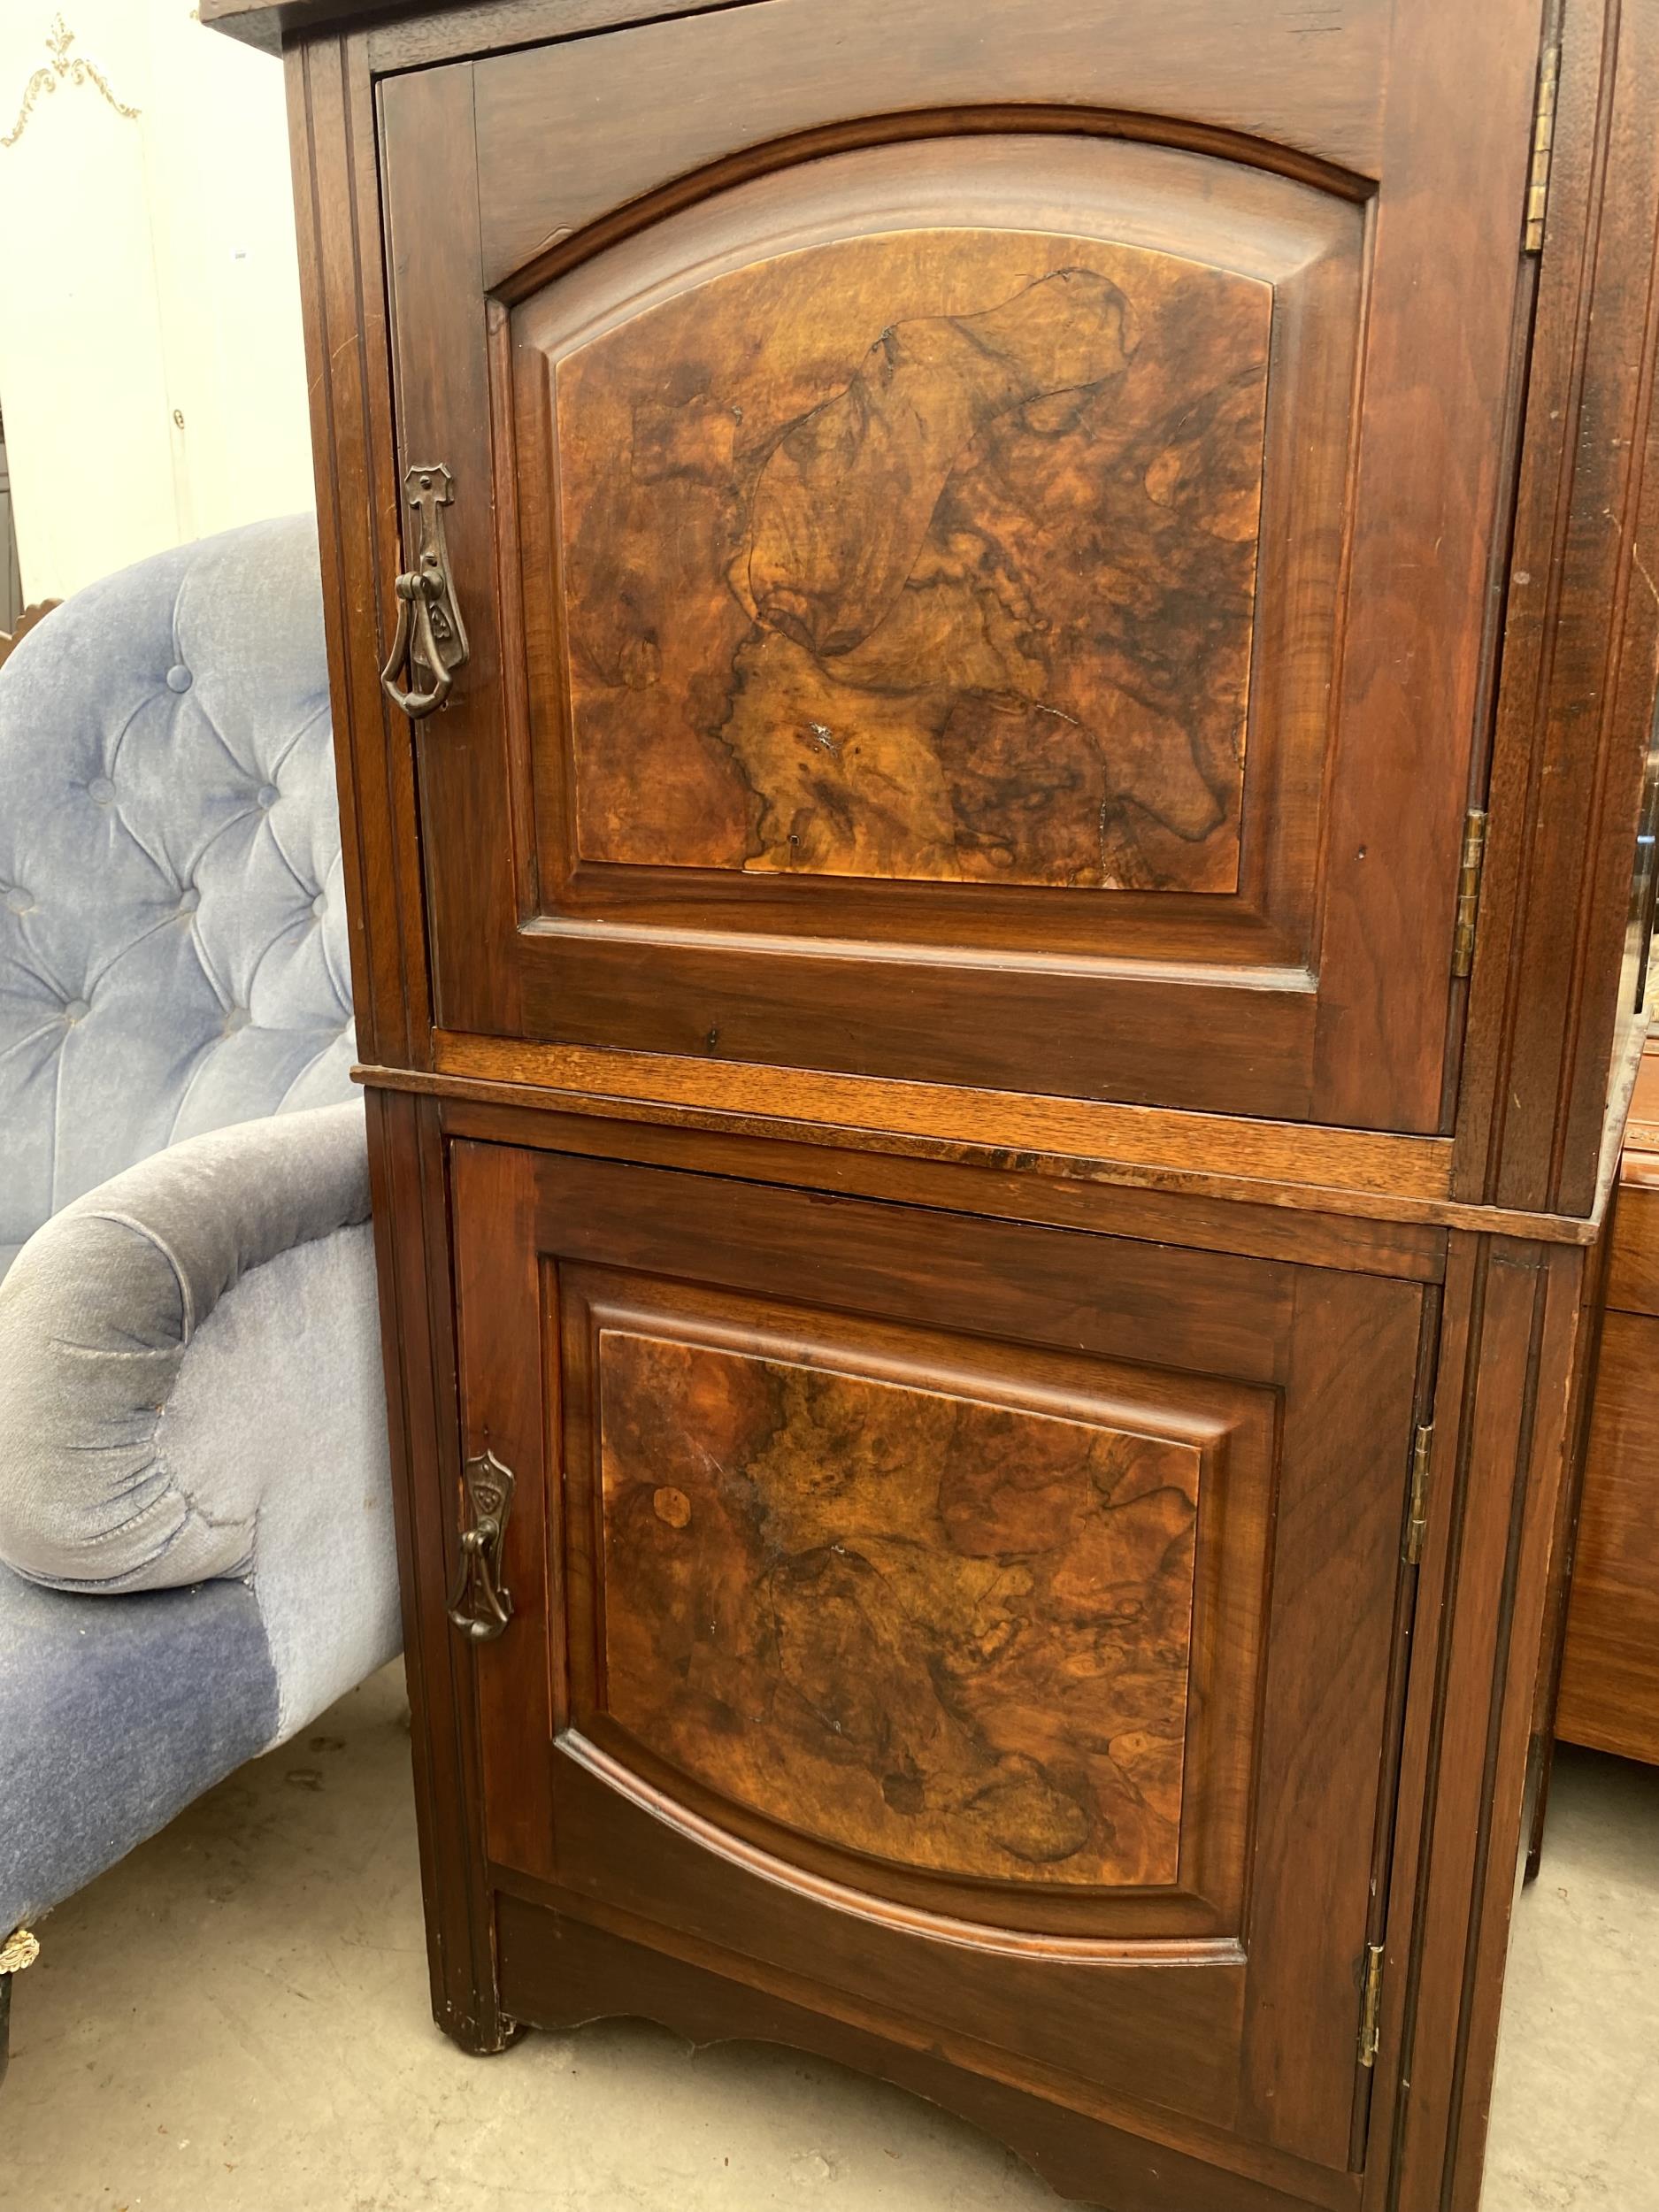 A LATE VICTORIAN TWO DOOR CUPBOARD, 23" WIDE - Image 3 of 3